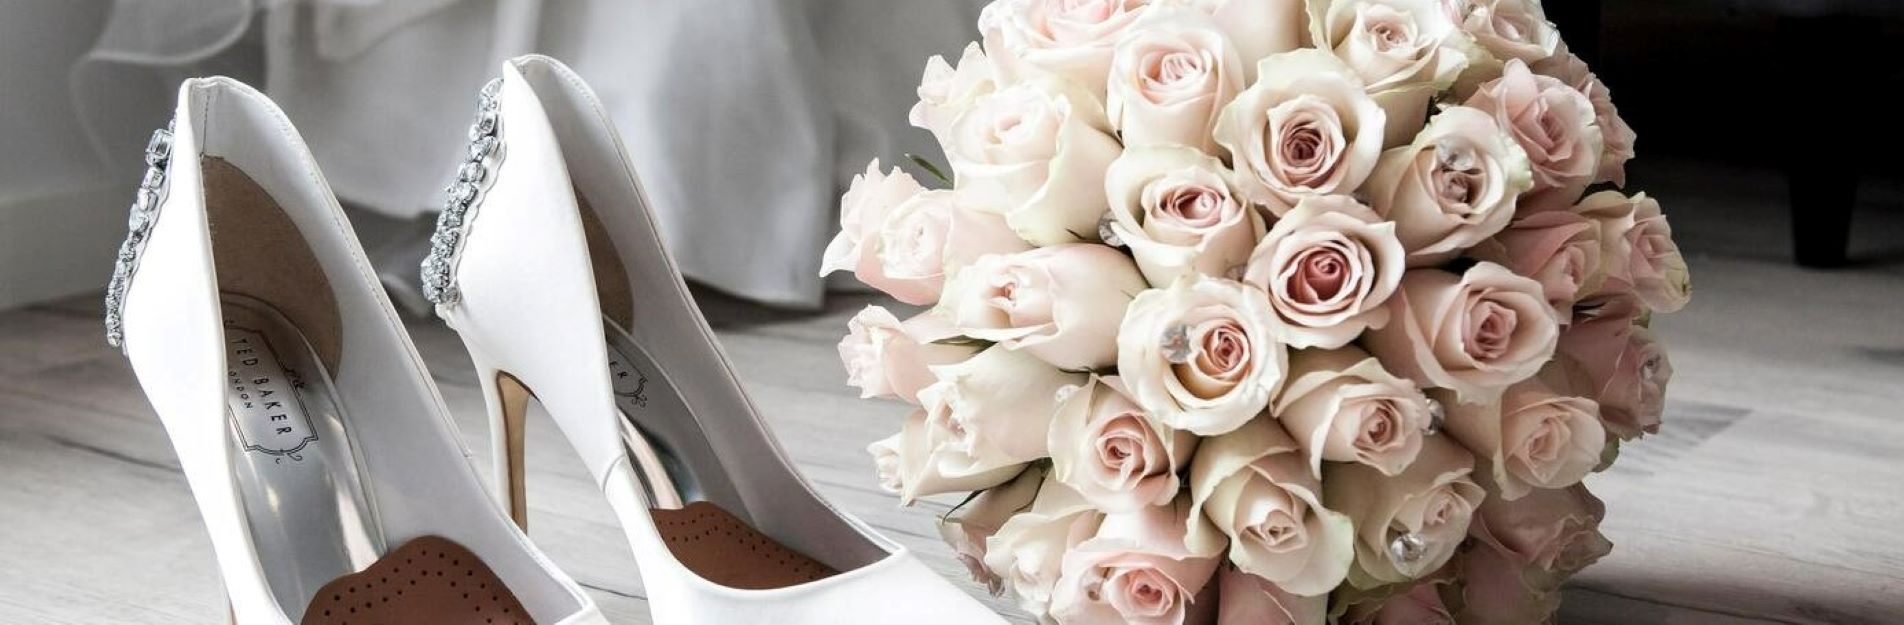 Image of wedding shoes and bouquet